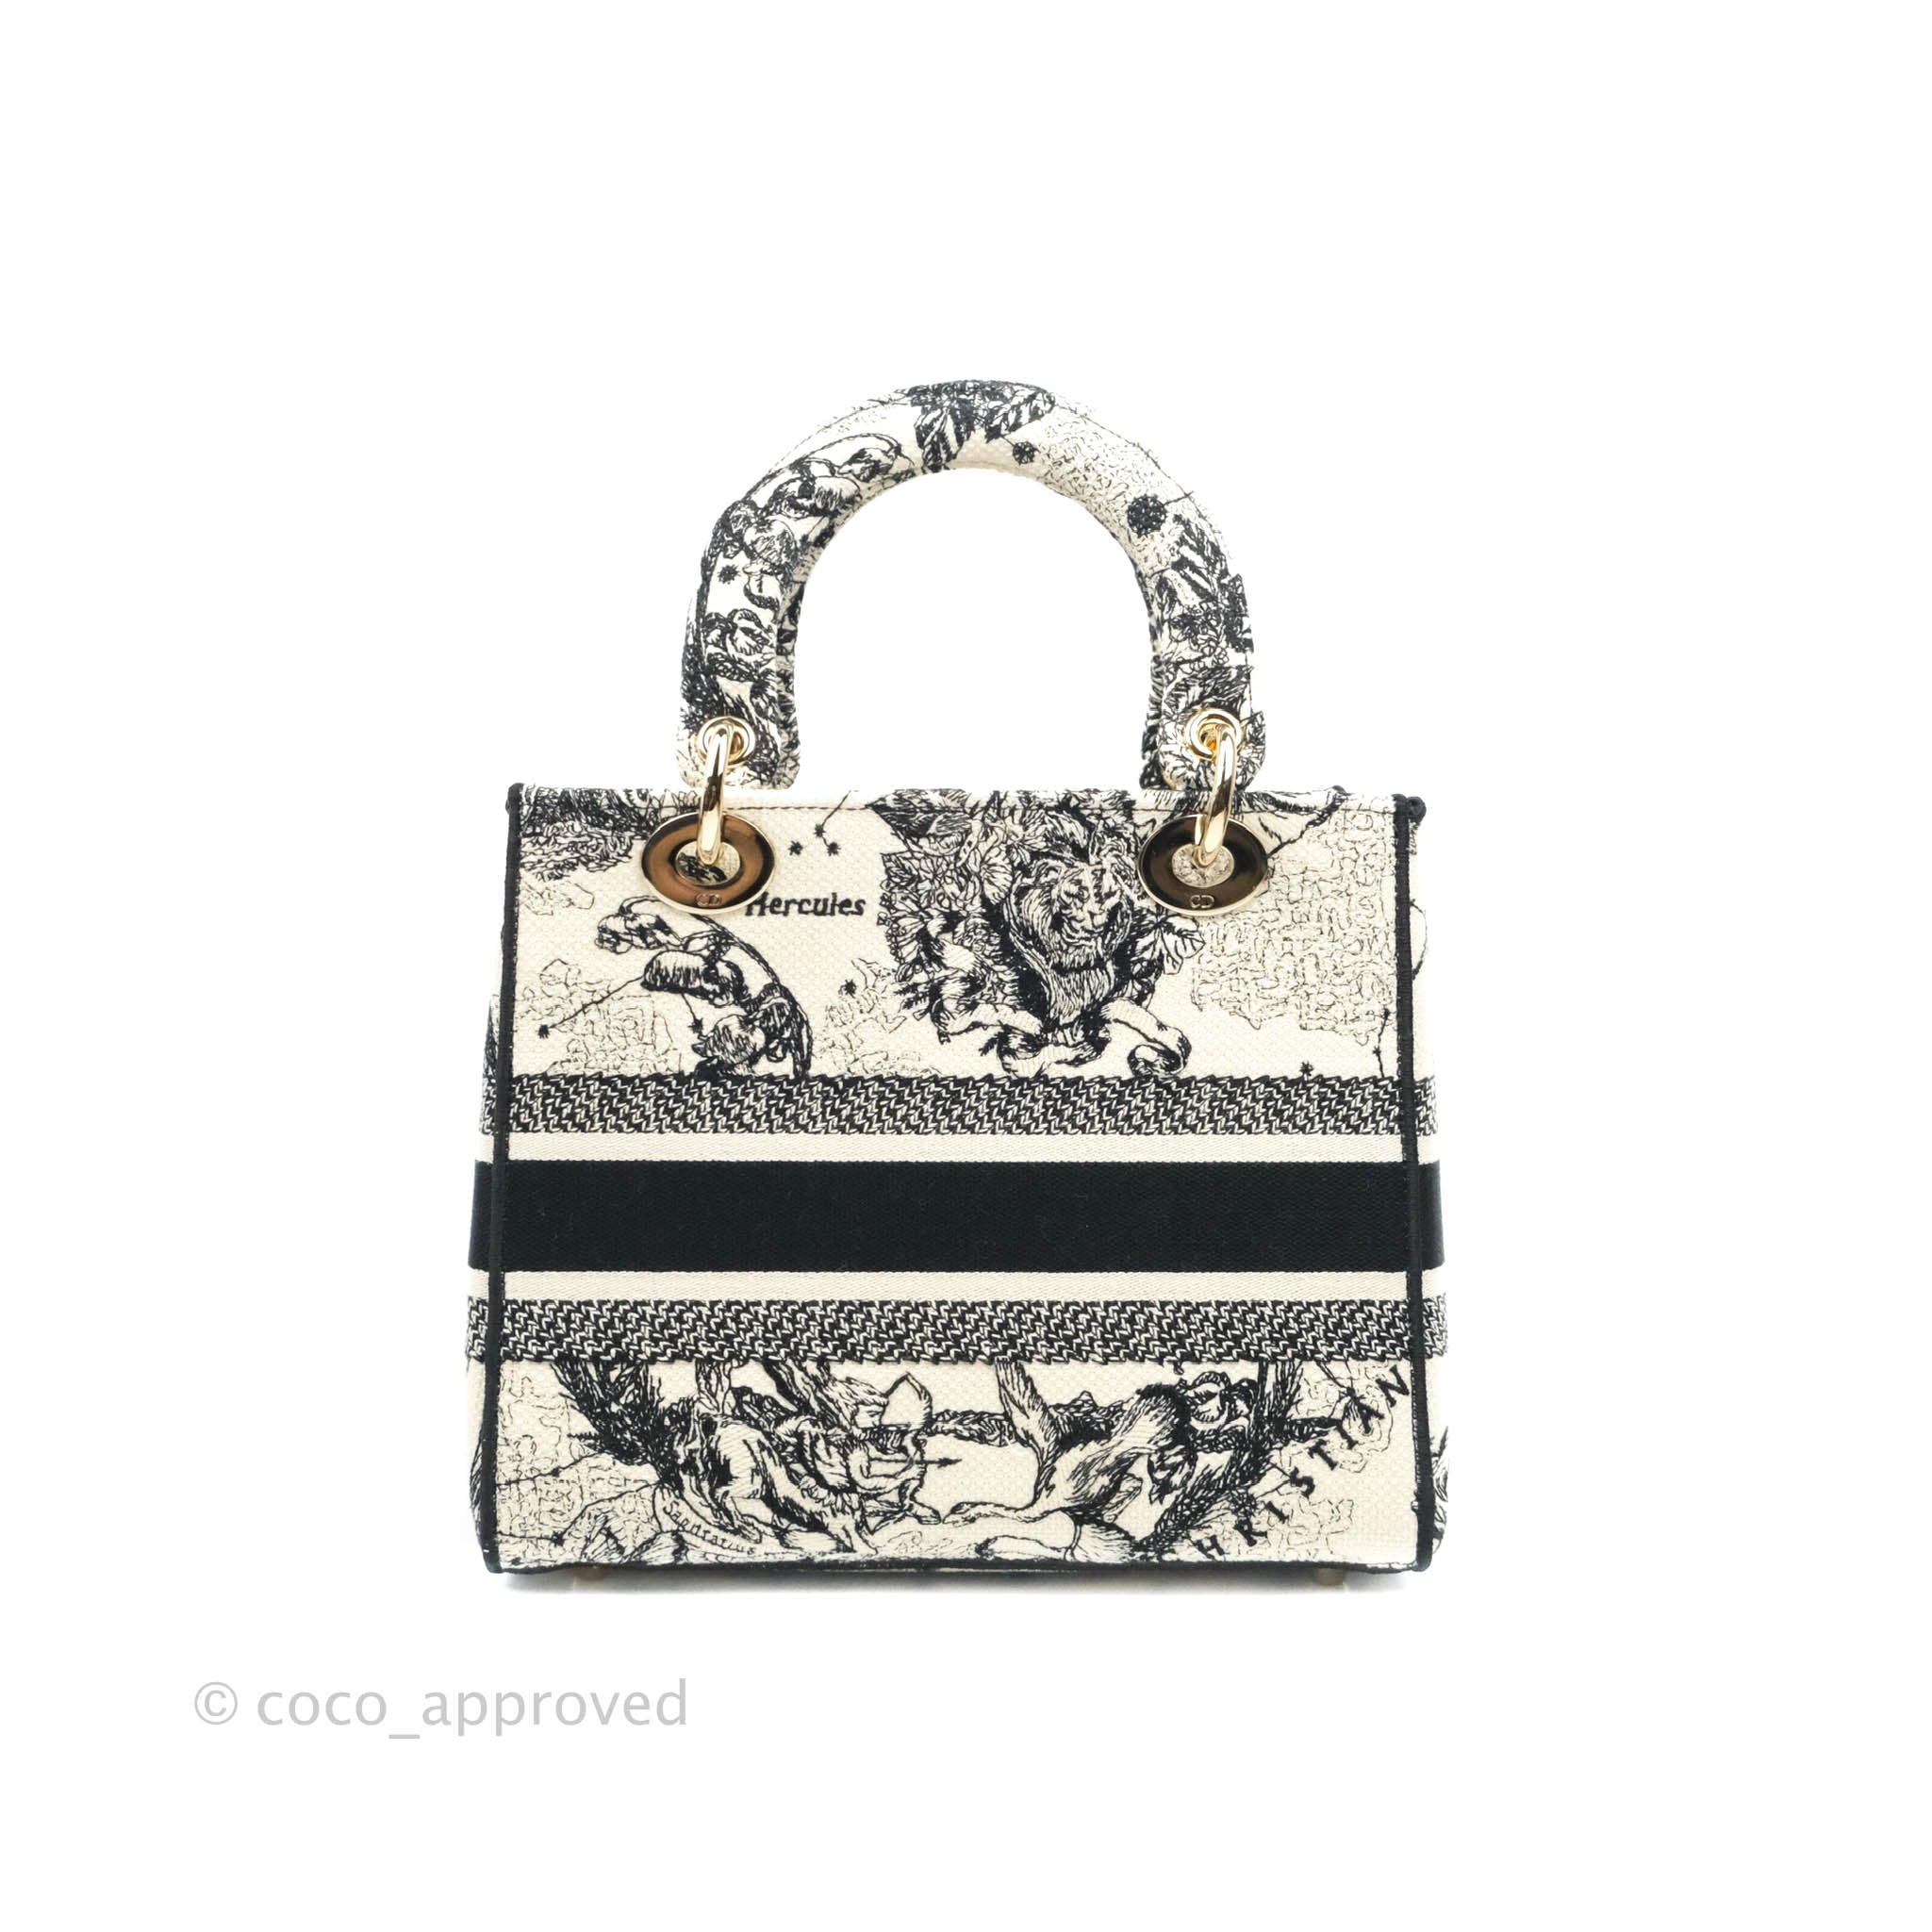 Dior Printed Leather Toile de Jouy Lady Dior Wallet on Chain Bag